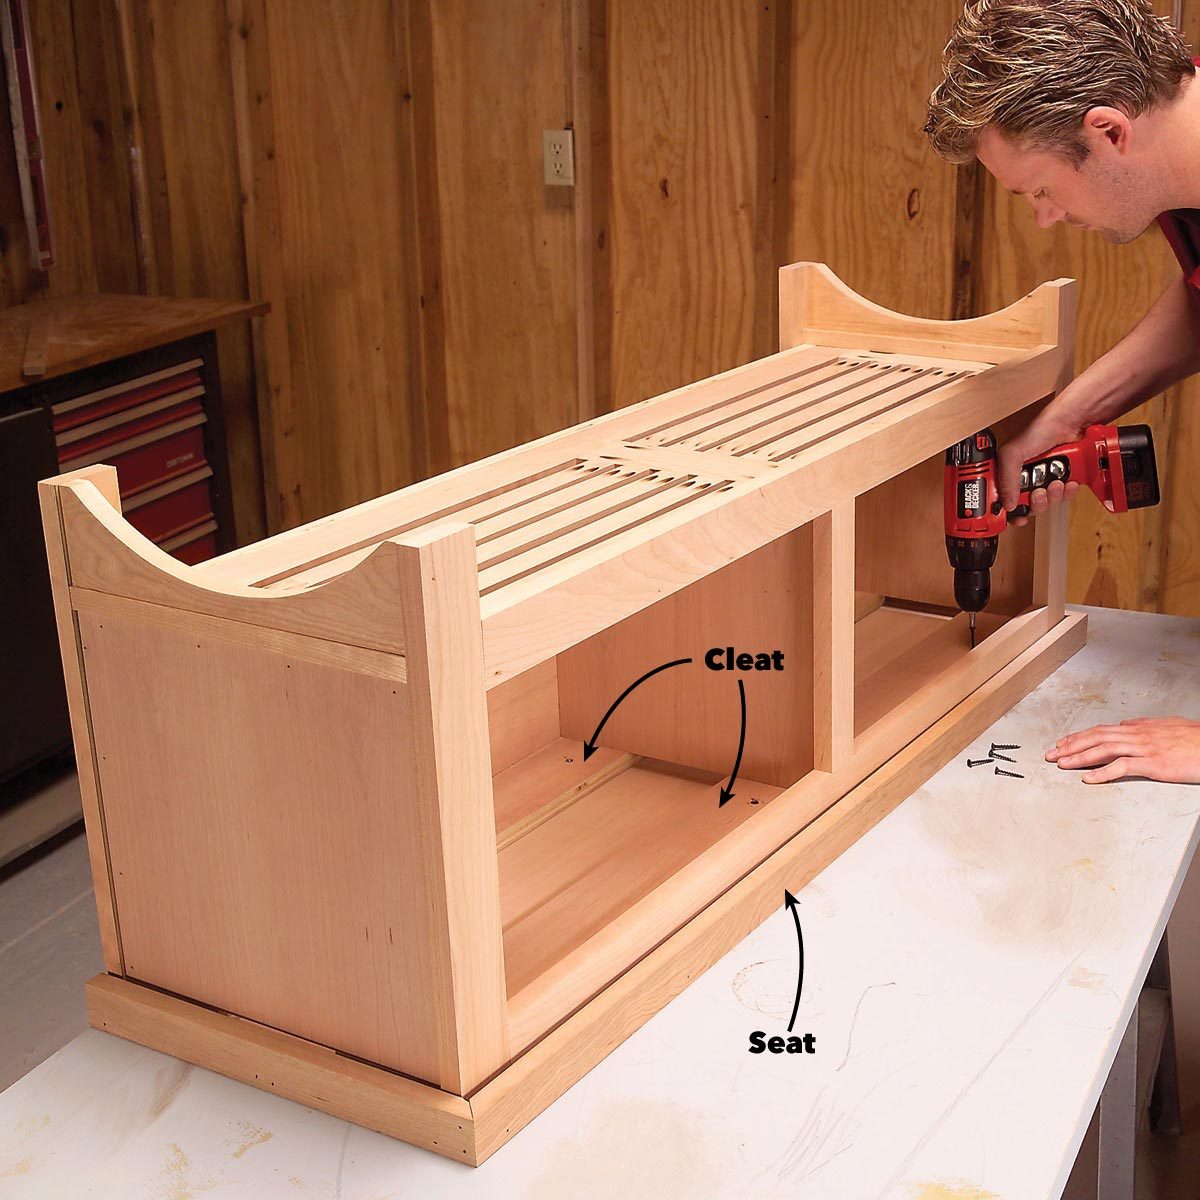 How to Build an Entryway Coat Rack and Storage Bench